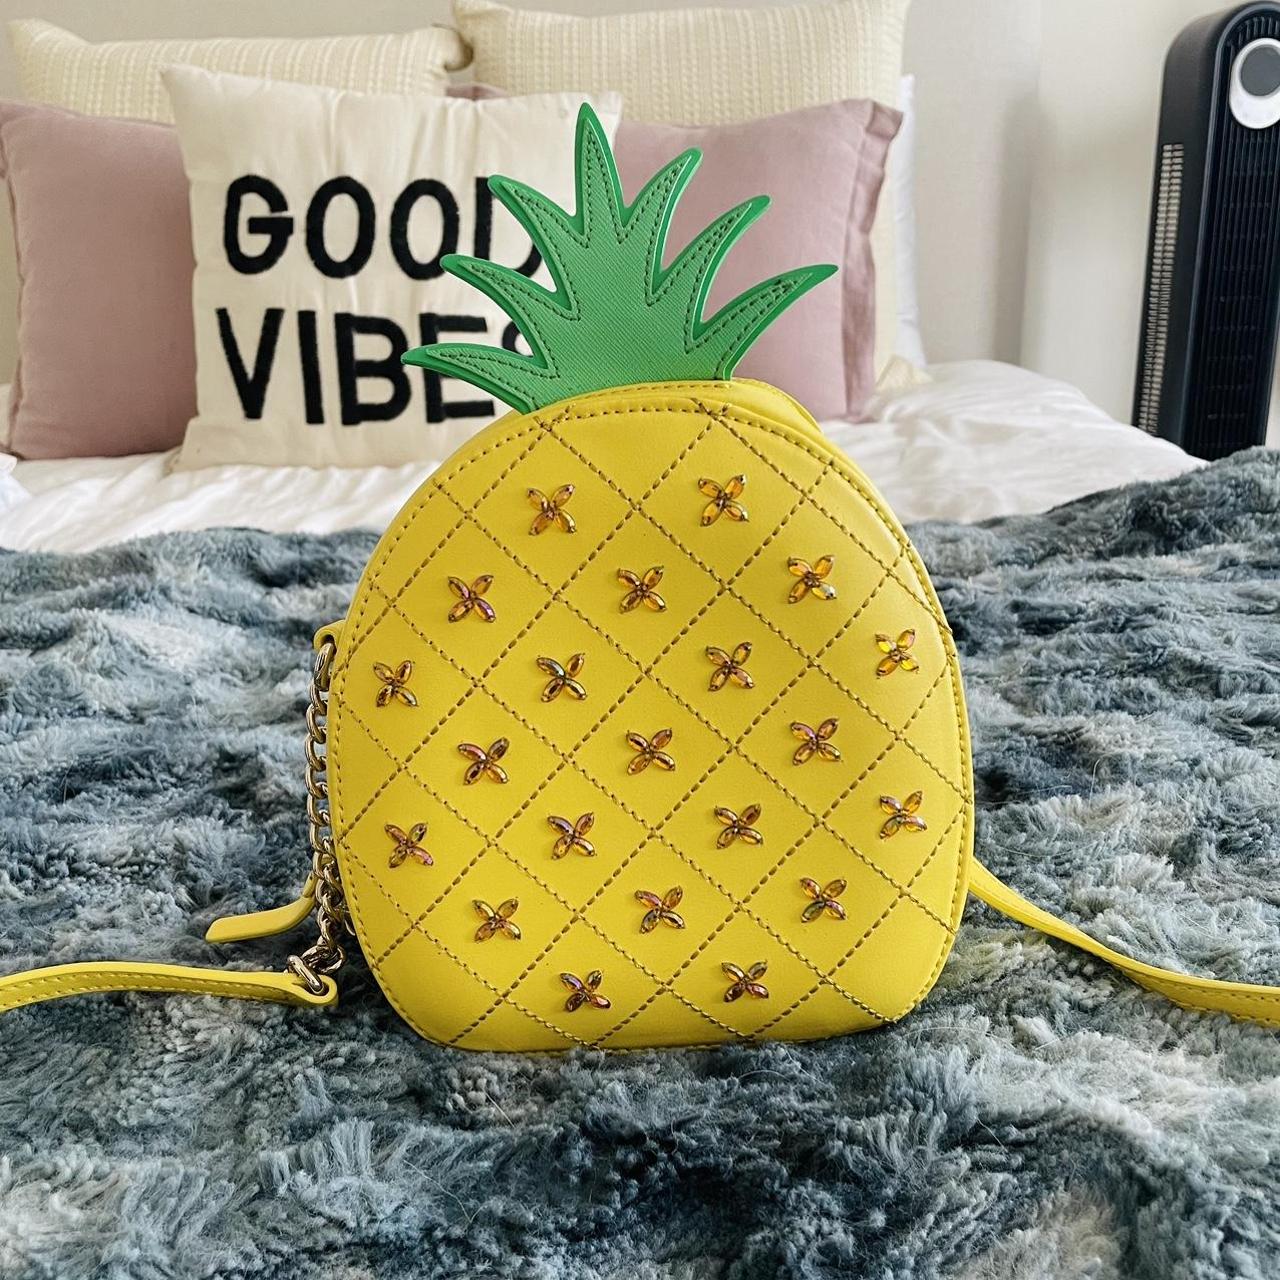 Kate Spade How Refreshing Pineapple Coin Purse Bag Pouch Yellow Cute  Limelight X | eBay